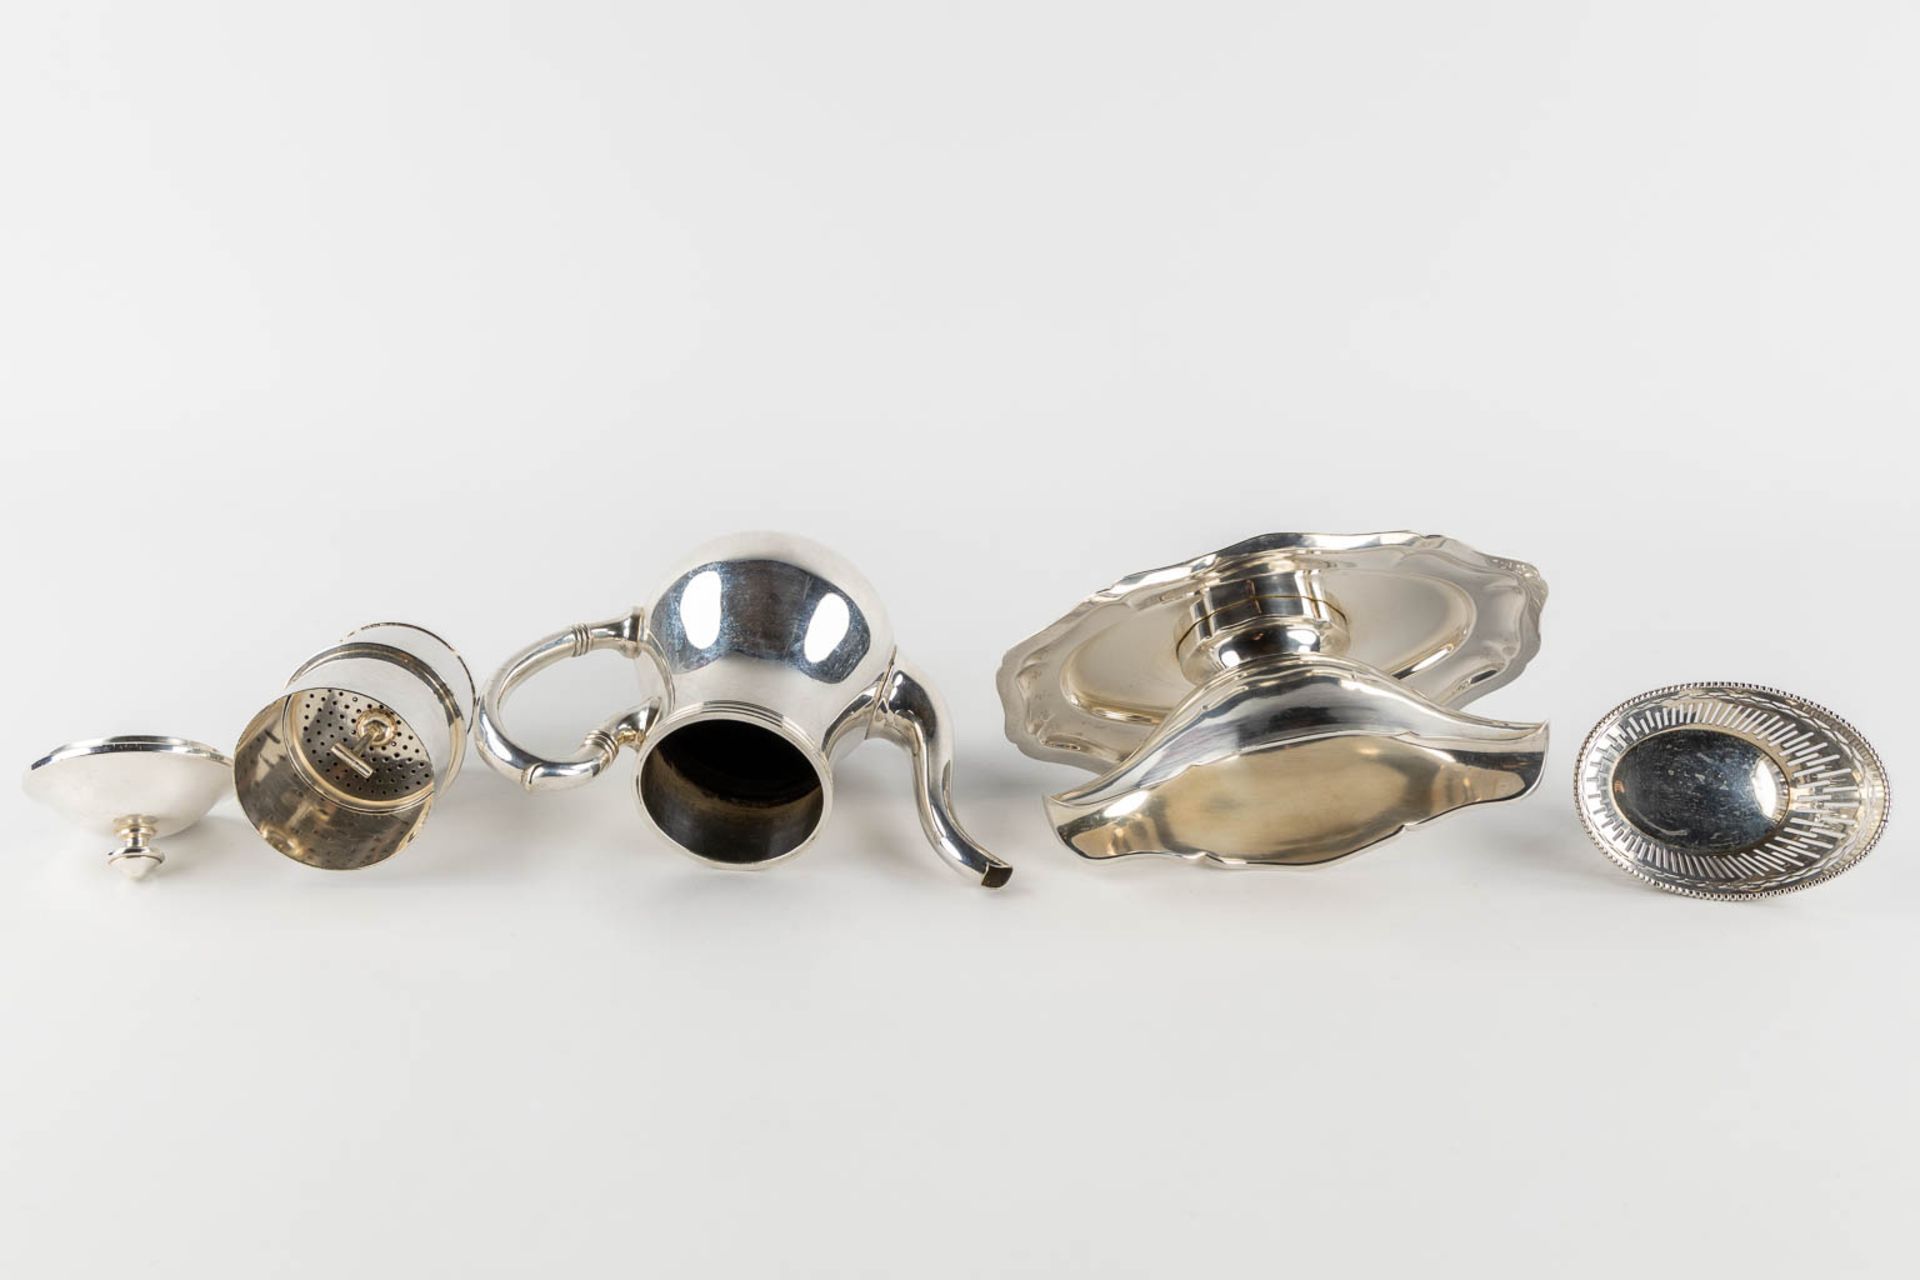 A collection of silver-plated serving accessories, saucer, coffee pot and a basket. (L:32 x W:52 cm) - Image 14 of 14